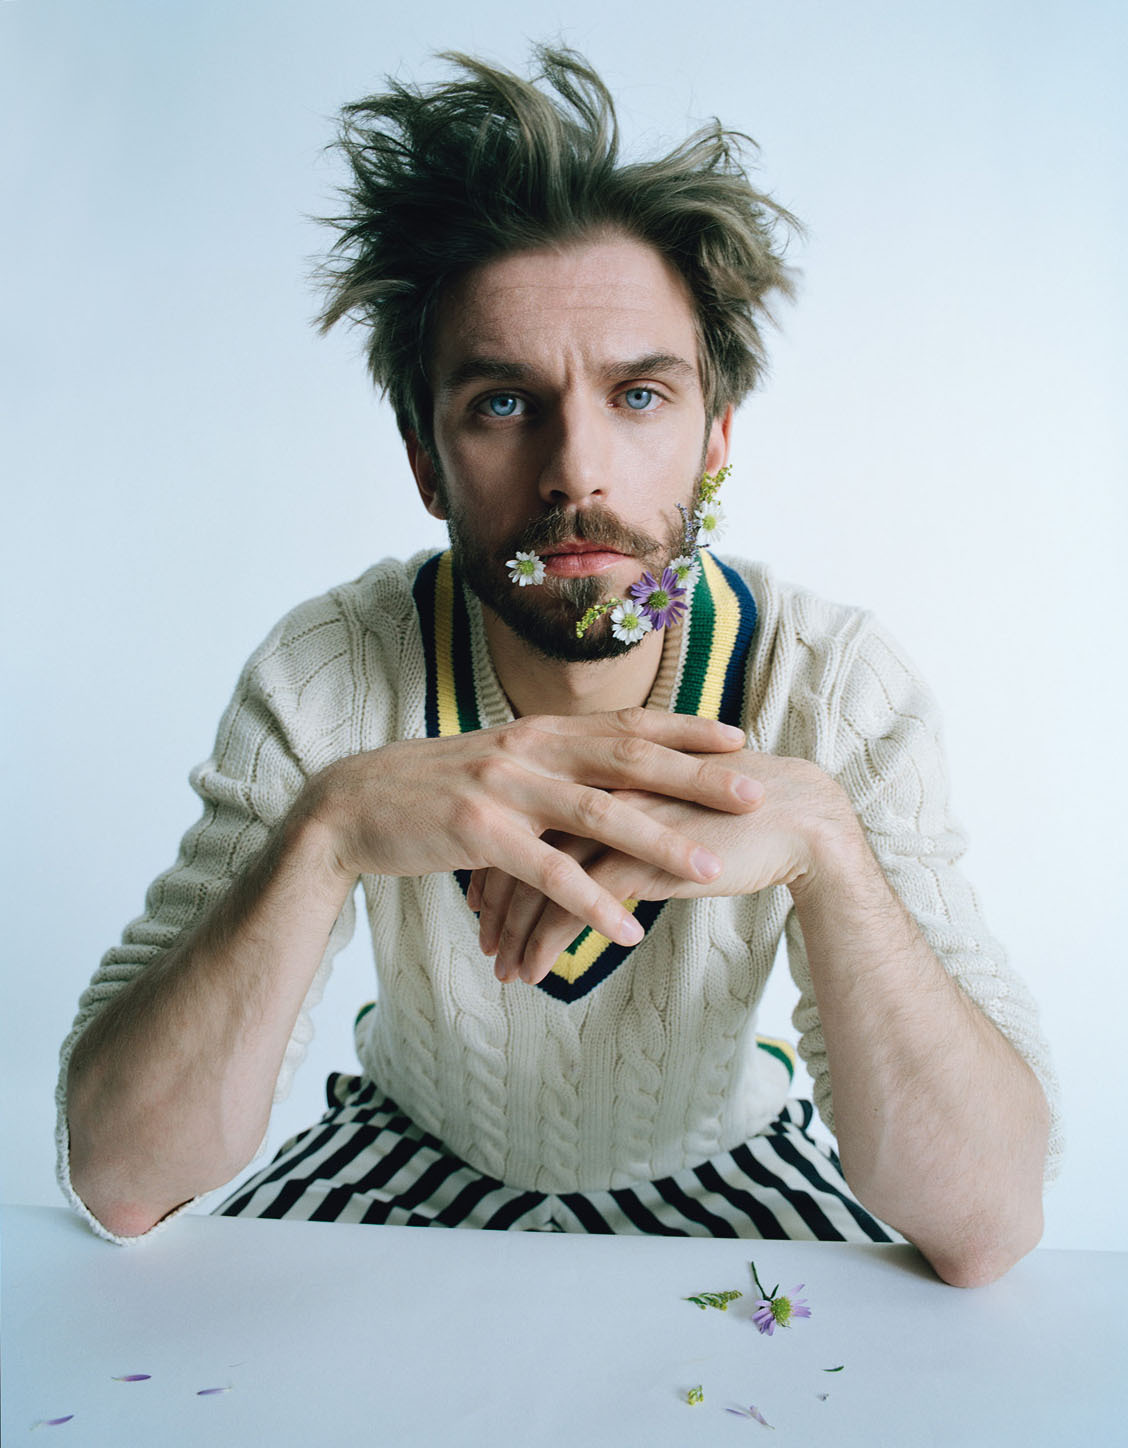 Actor Dan Stevens Bloomed in 2014
Photograph by Tim Walker; styled by Jacob K; W magazine February 2014. 